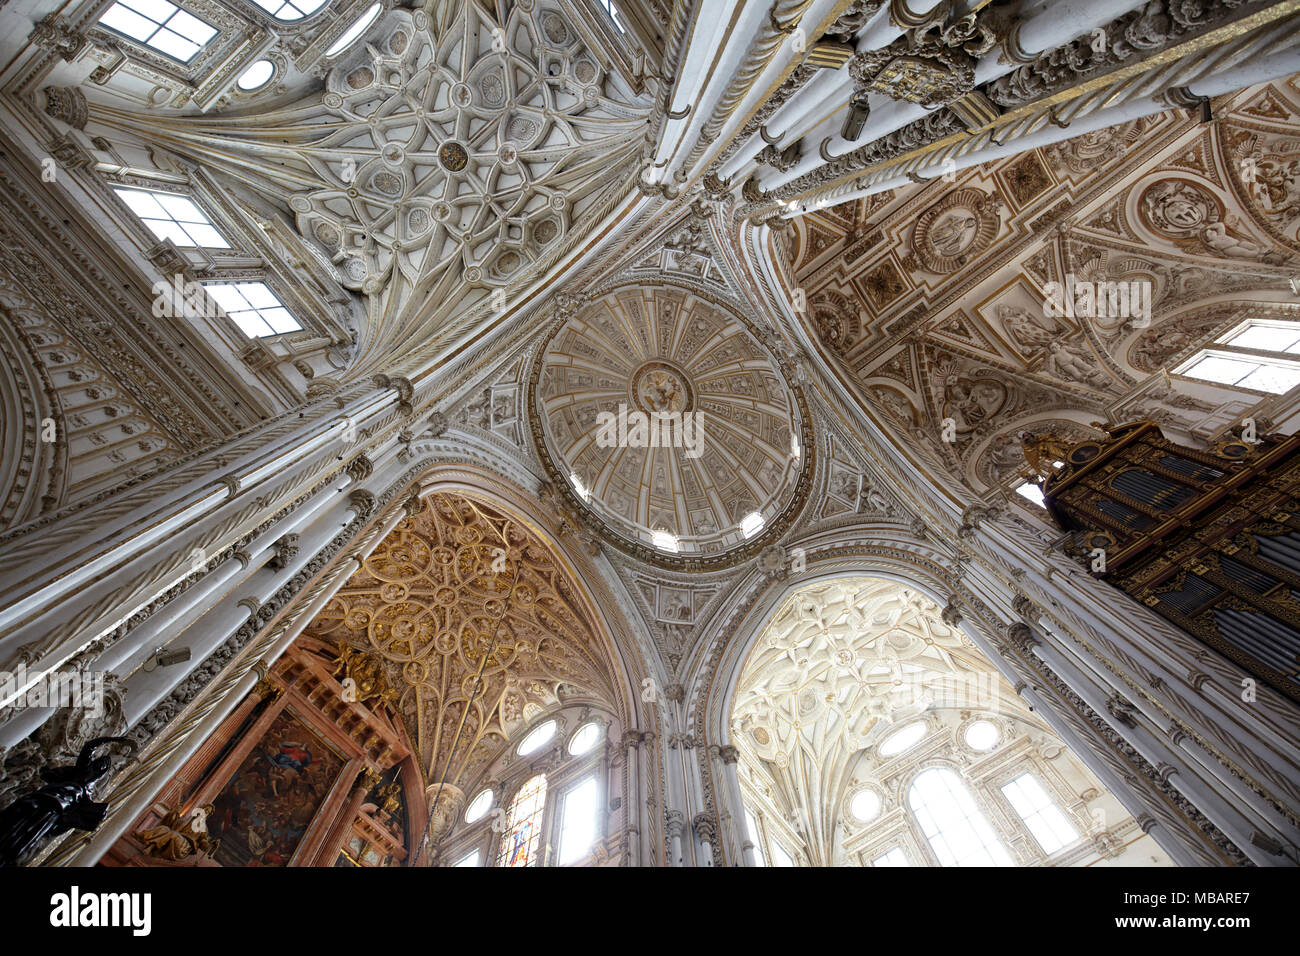 The ceiling of the Mosque–Cathedral of Córdoba, Andalusia, Spain Stock Photo